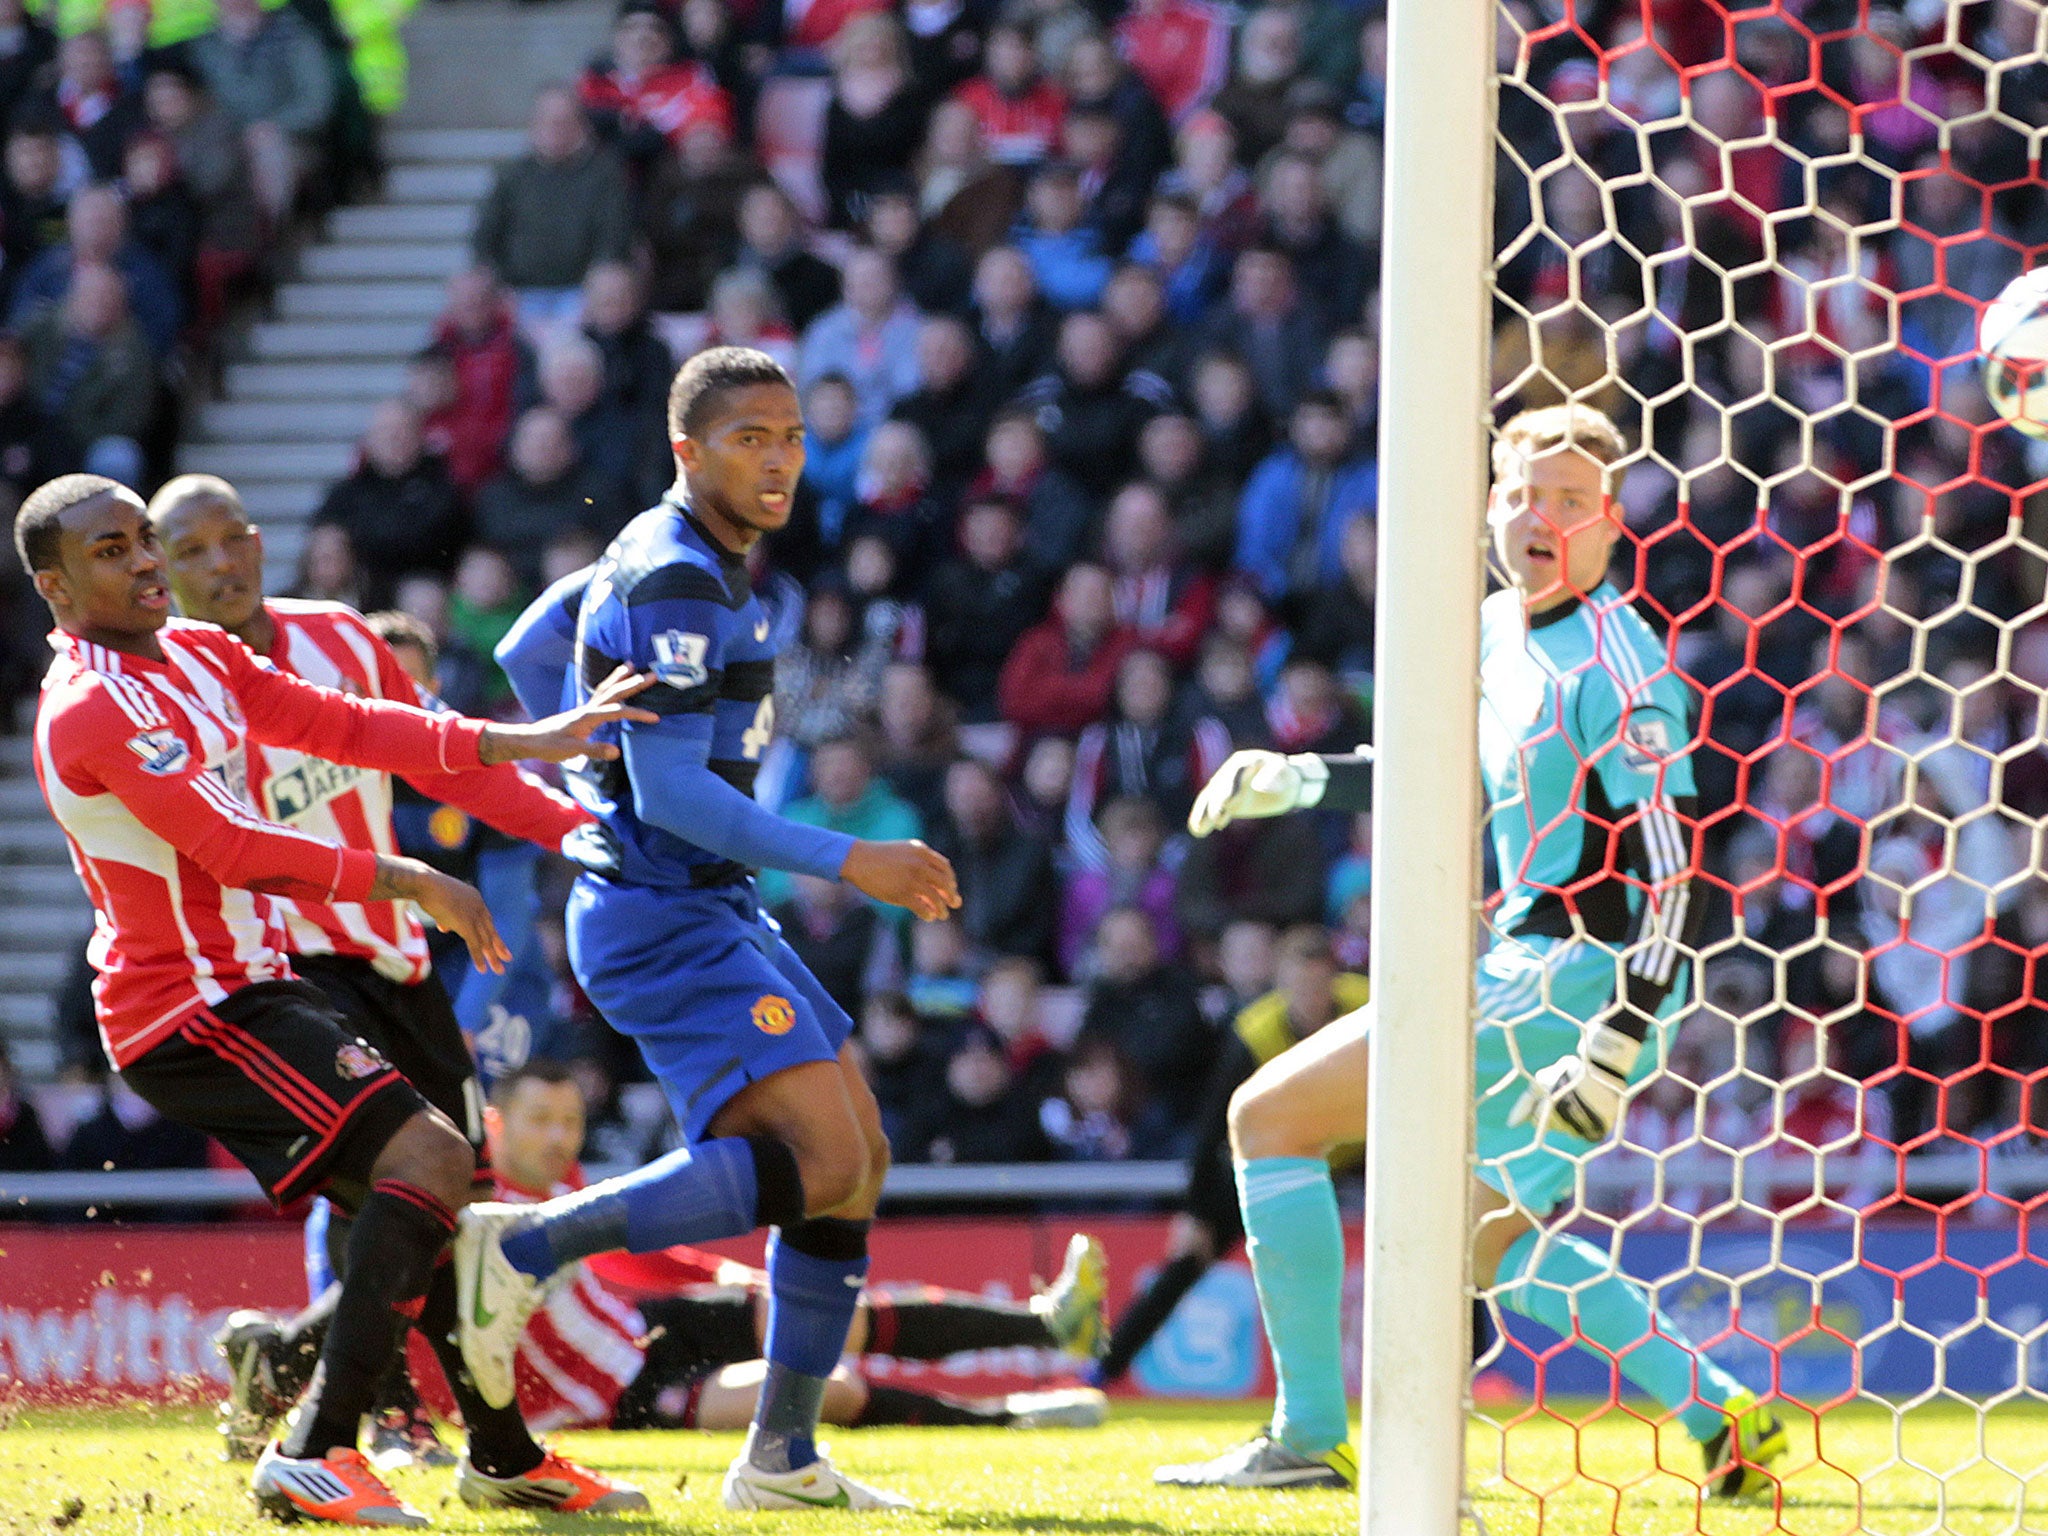 Manchester United's Dutch striker Robin van Persie (not pictured) scores the opening goal via a deflection off Sunderland's English defender Titus Bramble